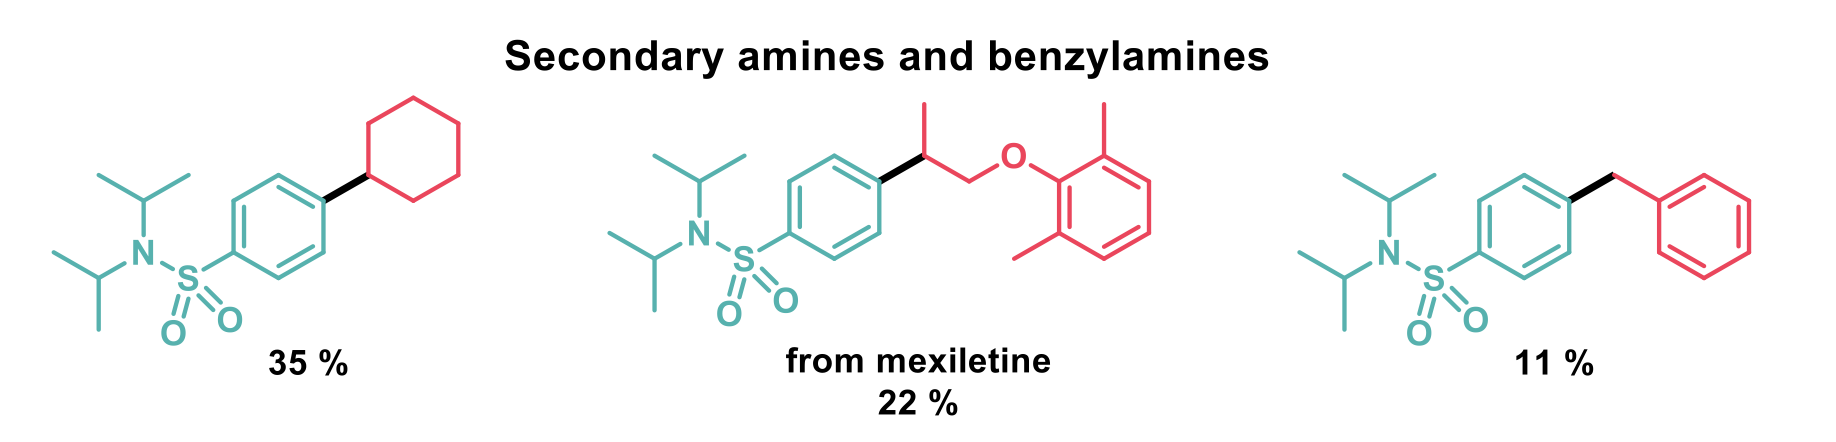 Secondary amines and benzylamines